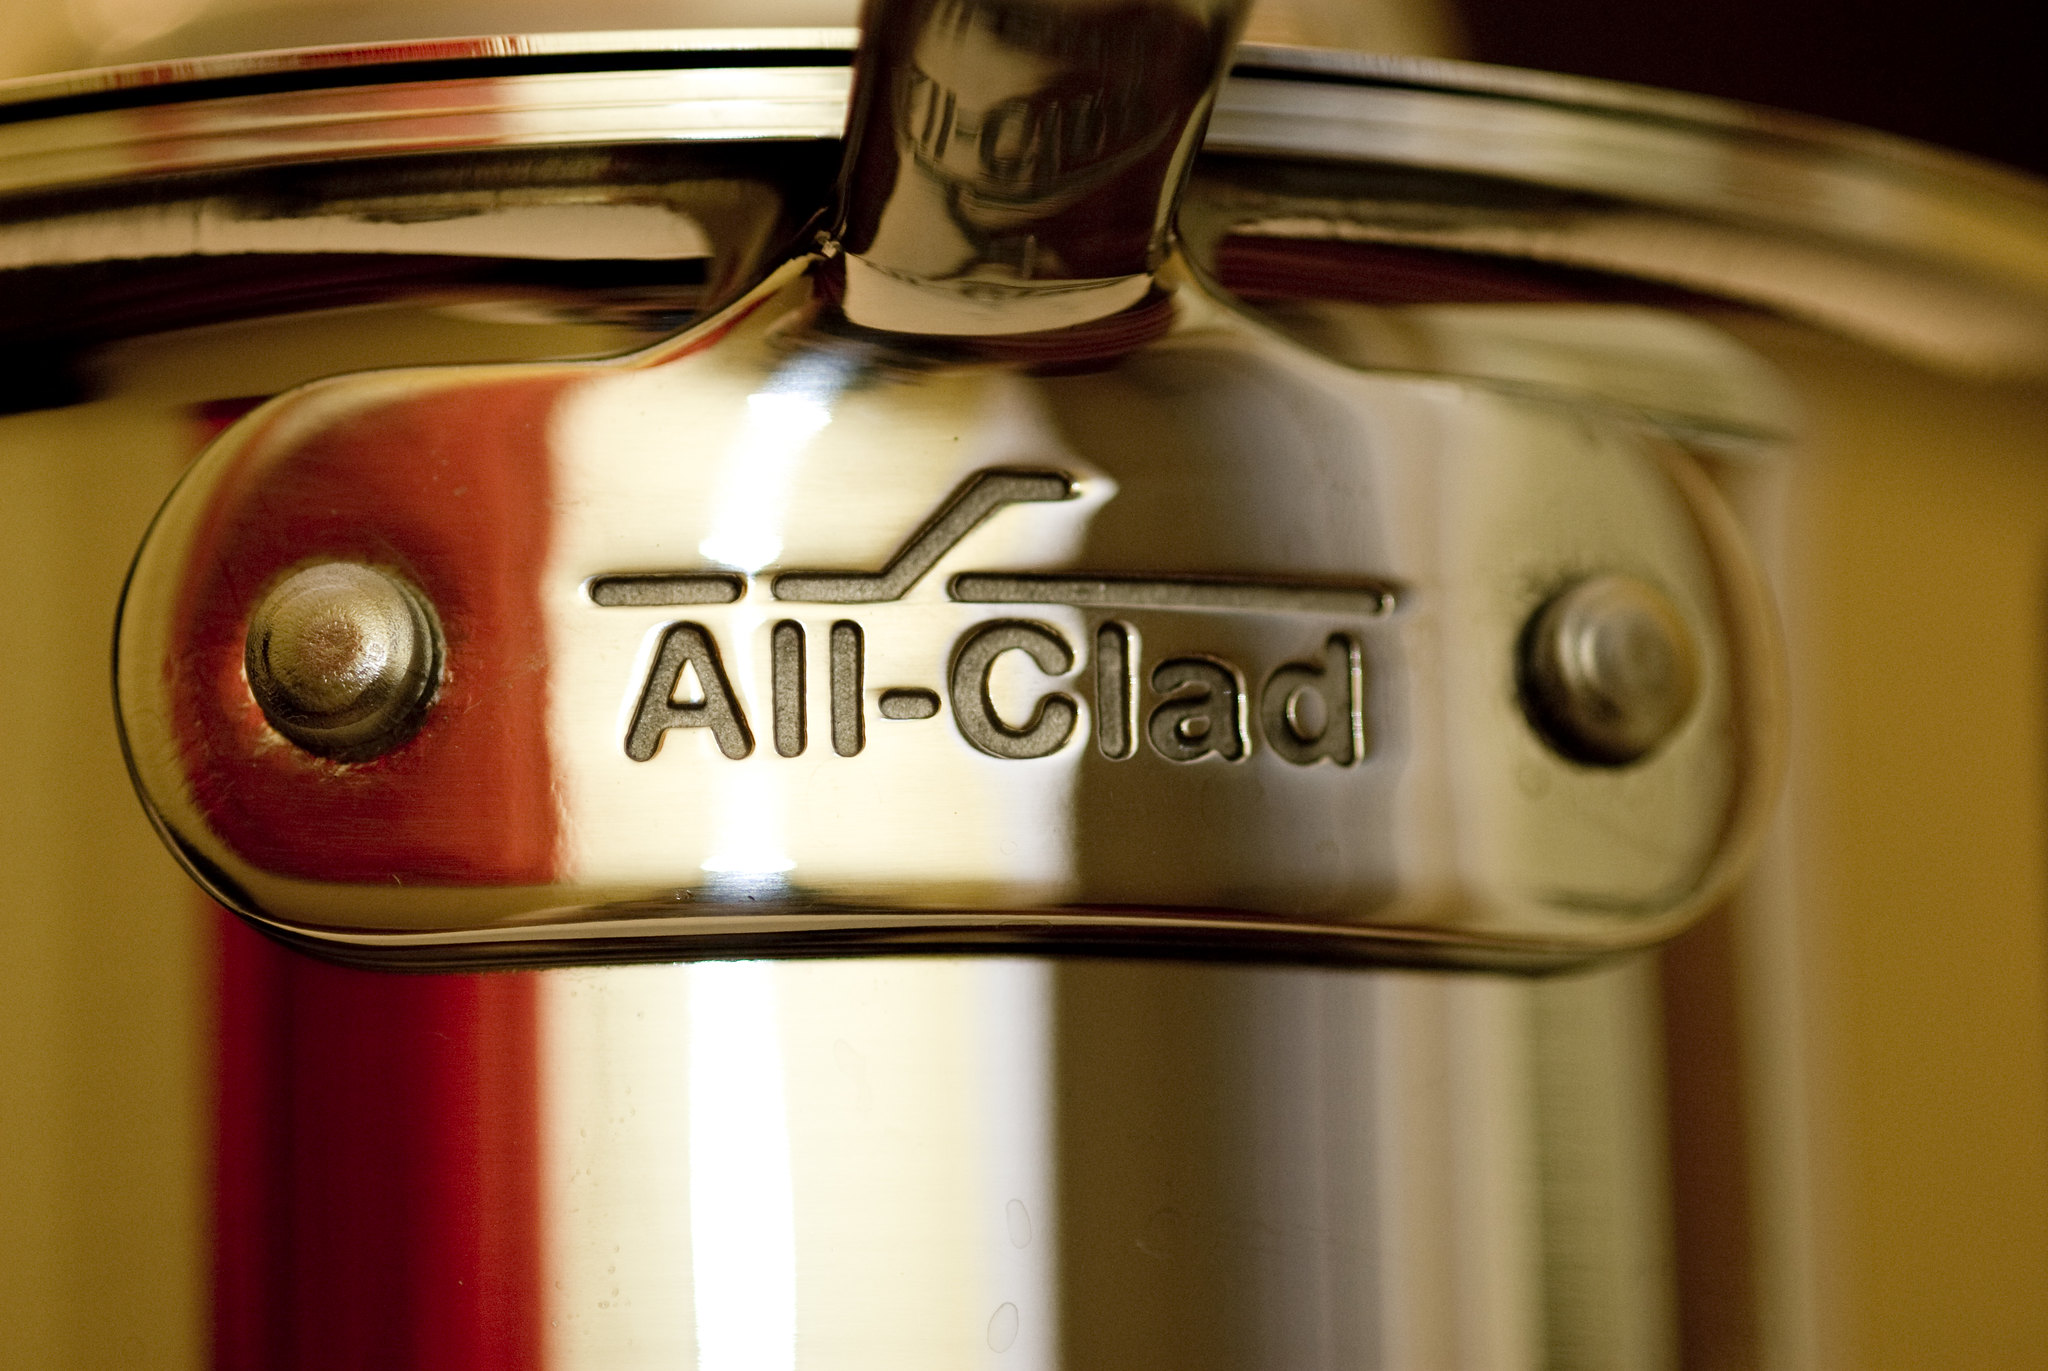 All-Clad Metalcrafters - The new All-Clad Electric Rice & Grain